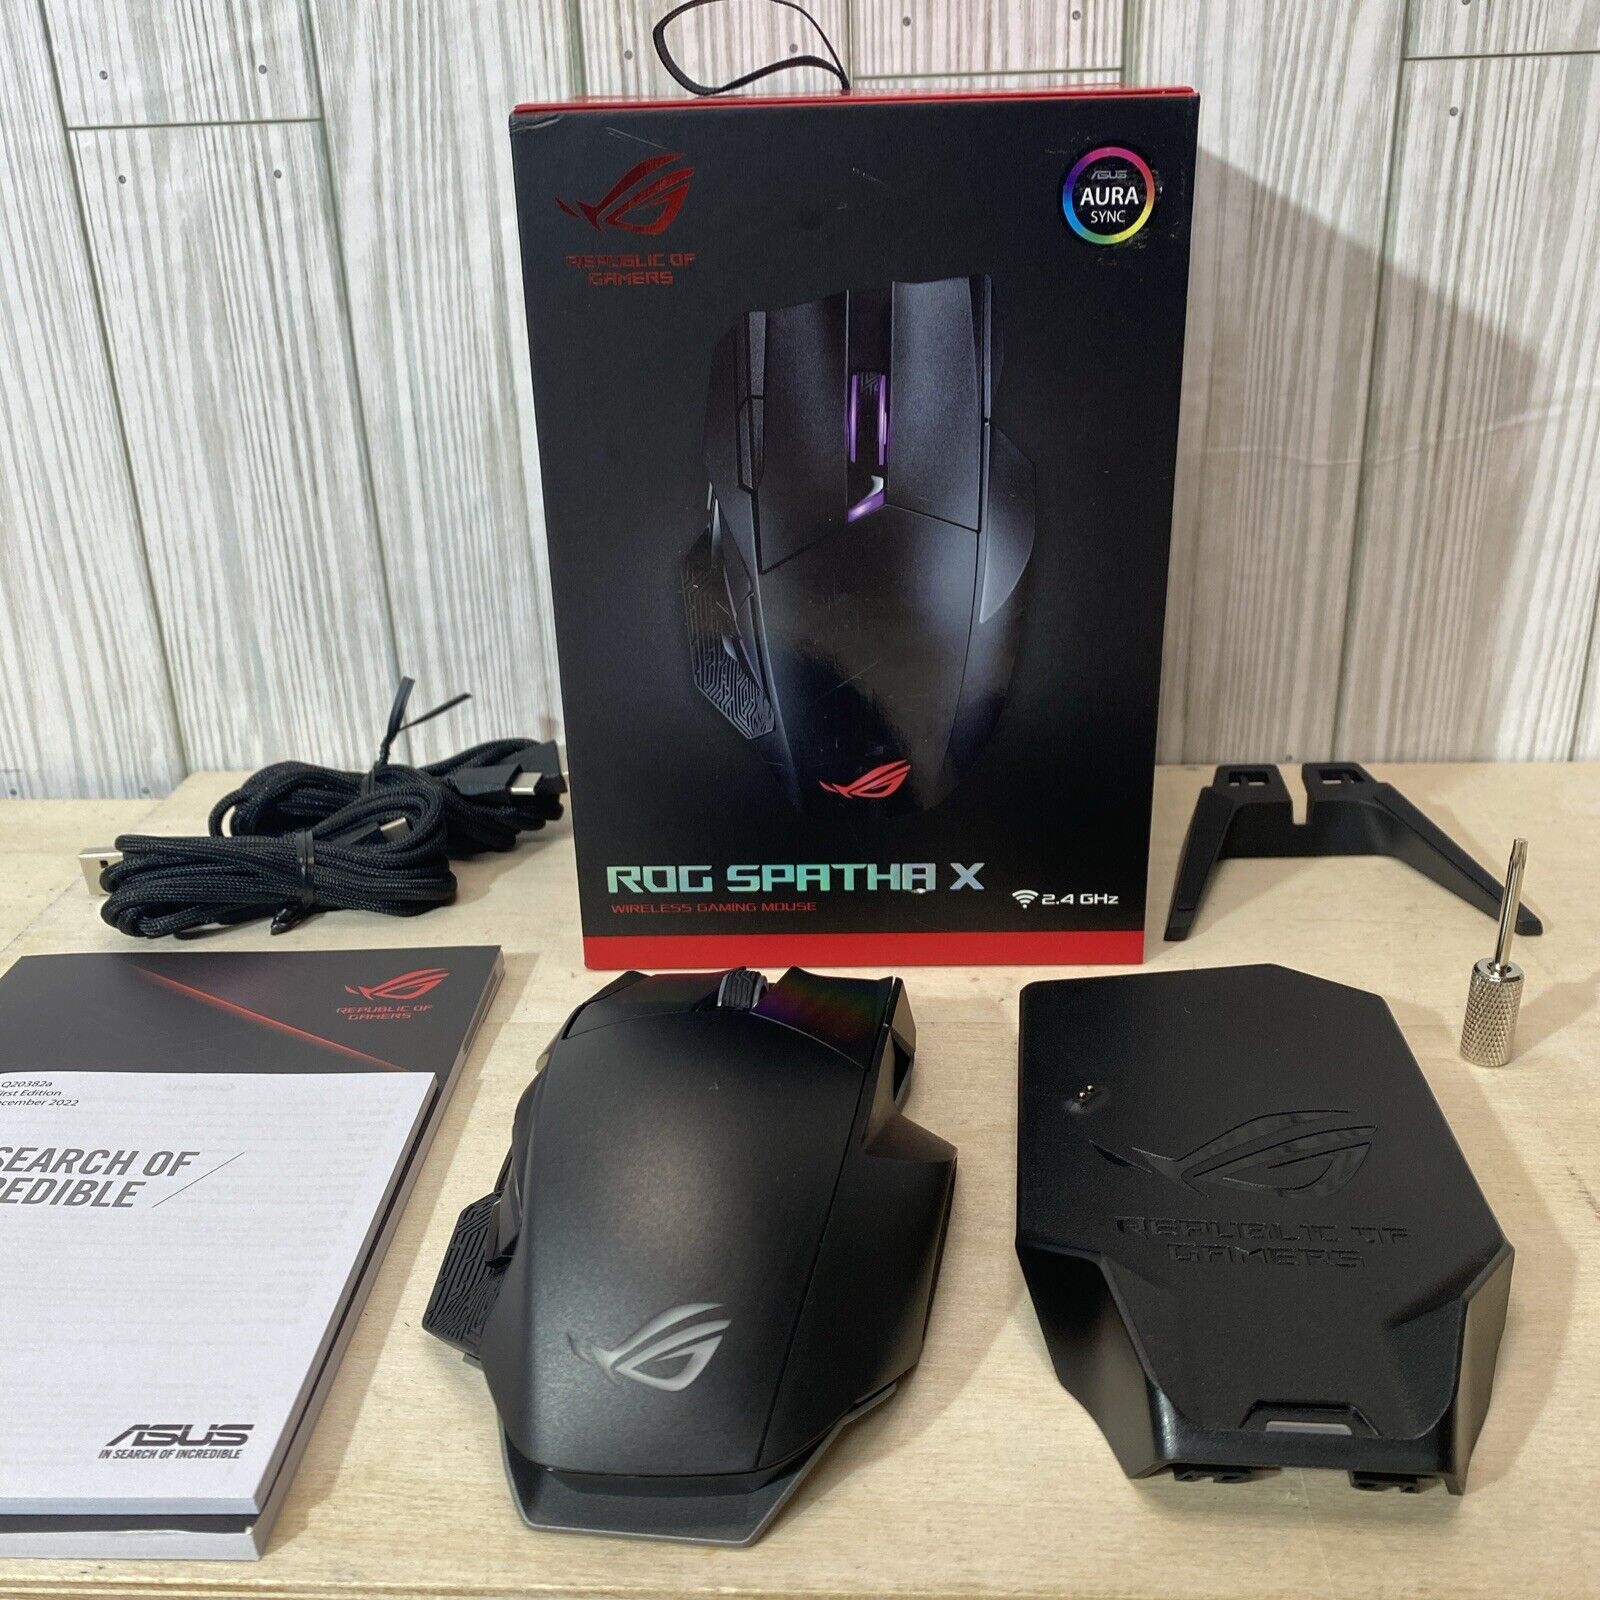 ASUS ROG SPATHA X WIRELESS GAMING MOUSE New Open Box